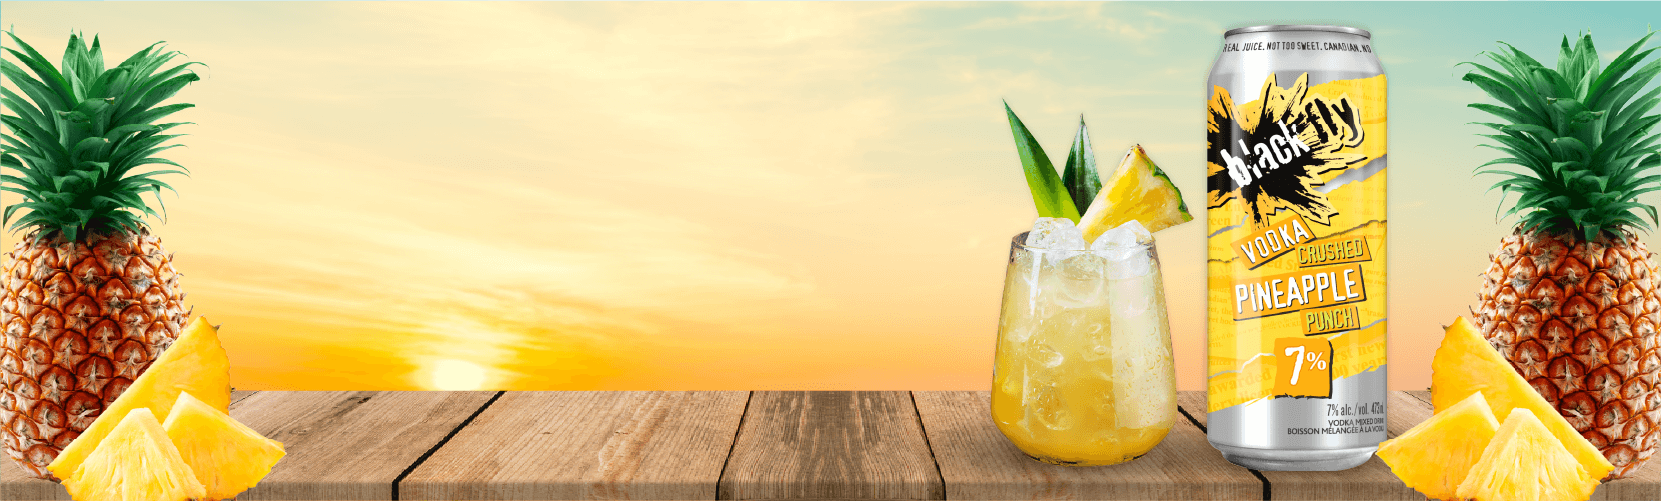 Vodka Crushed Pineapple Punch